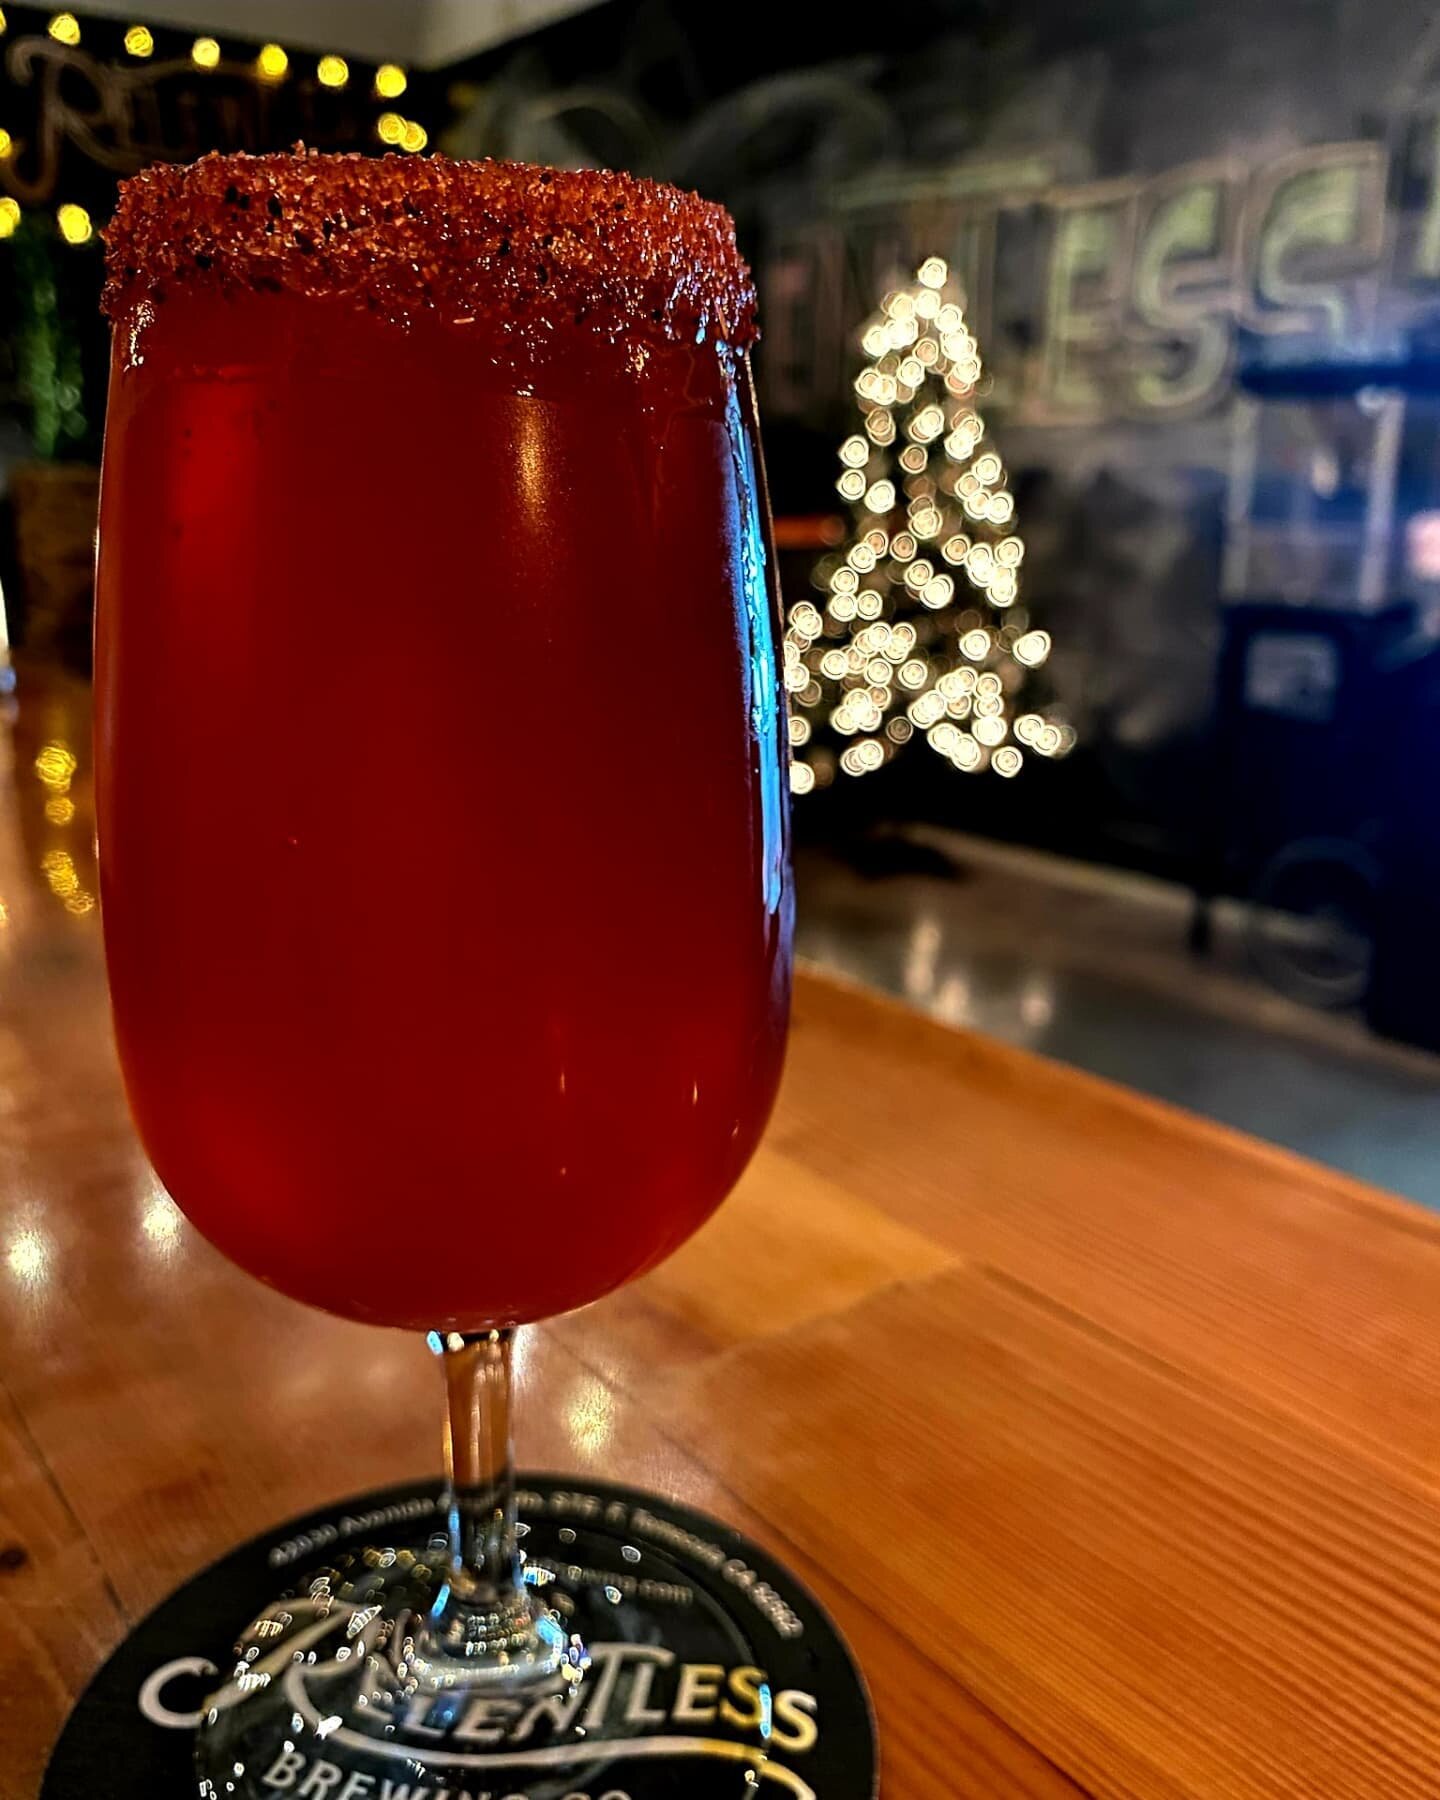 Our tasting room is filled with holiday cheer. 🎄is soon approaching, we have so many 🎁ideas for your loved ones. So stop by, have some beer while you shop. We have Surfer's Blood🌊 on tap now. Our popular Hibiscus Cranberry Gose. You can add some C